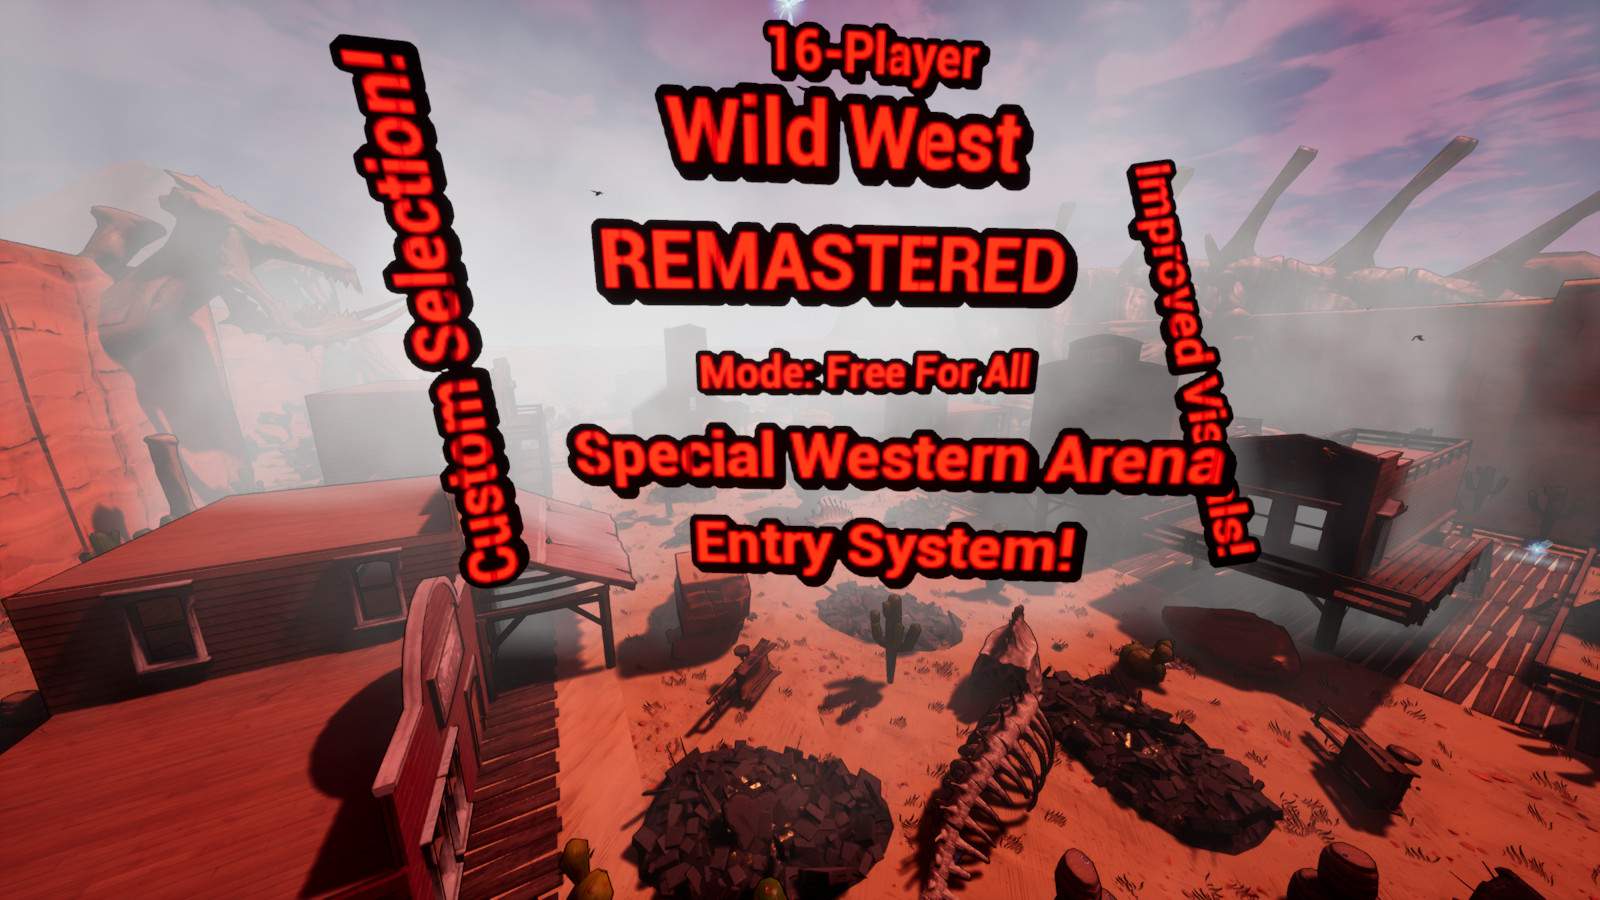 WILD WEST REMASTERED FREE FOR ALL